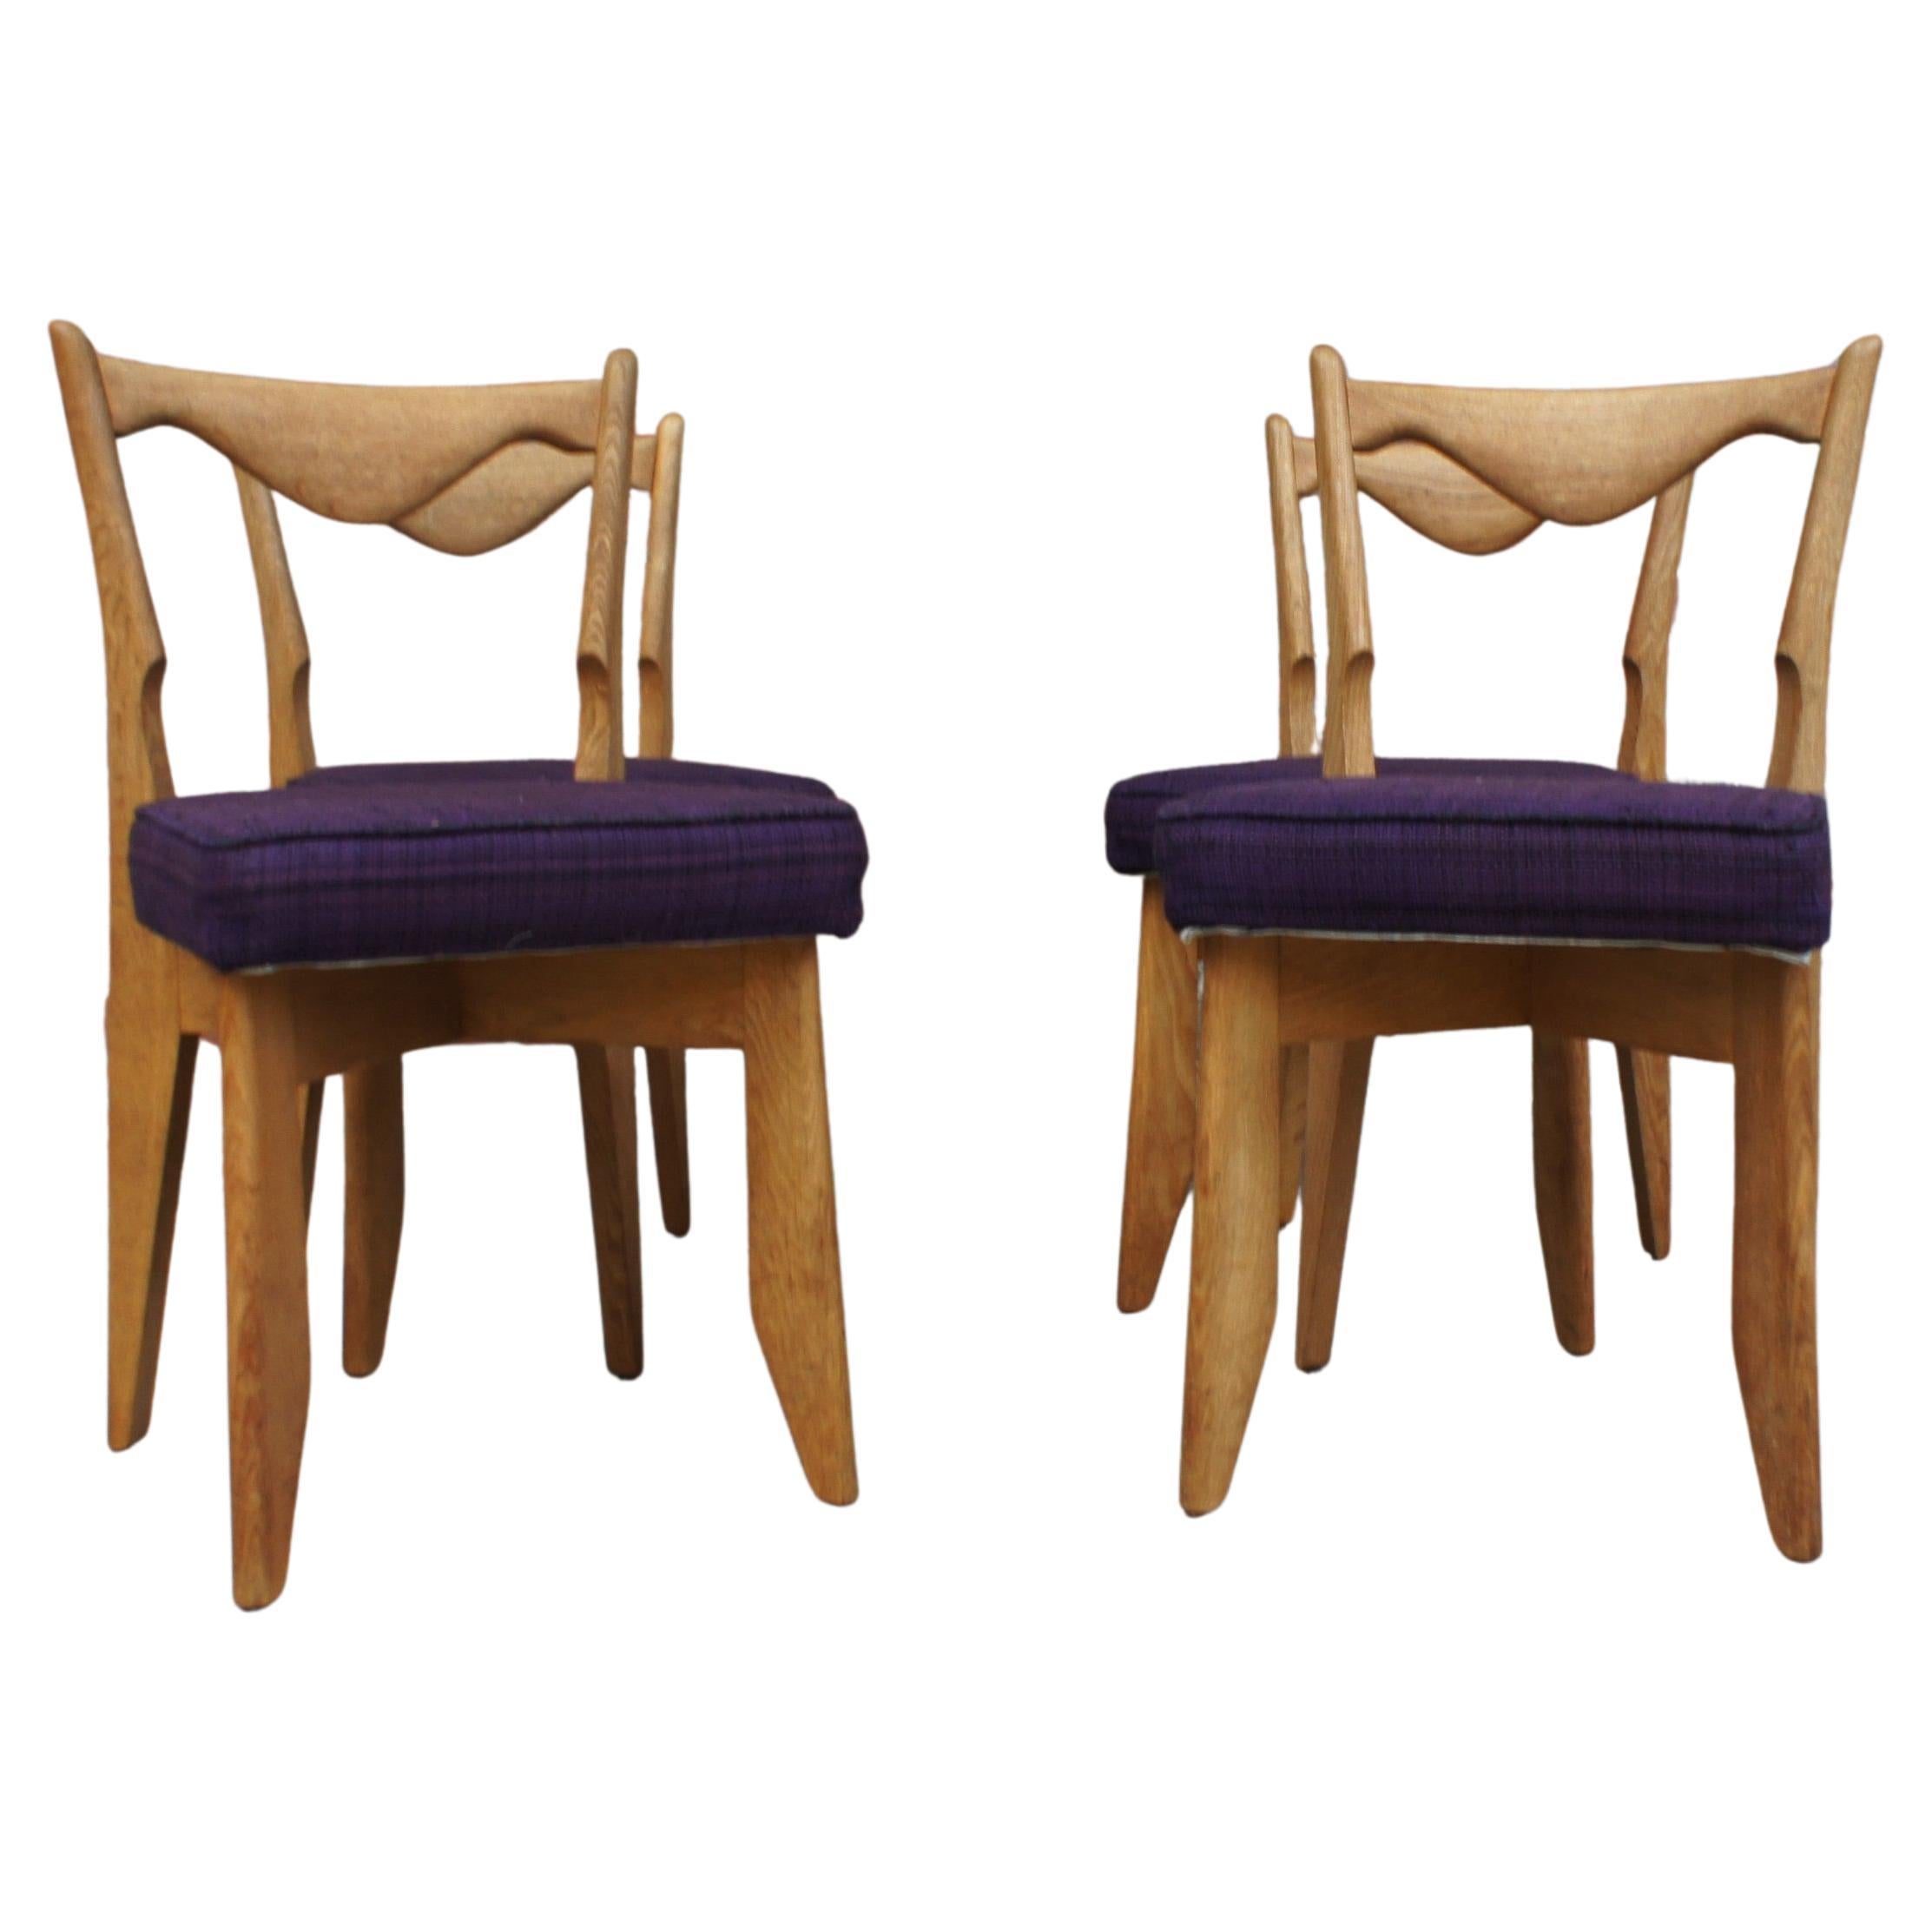 Series of 4 chairs by Guillerme and Chambron for "Votre Maison" 